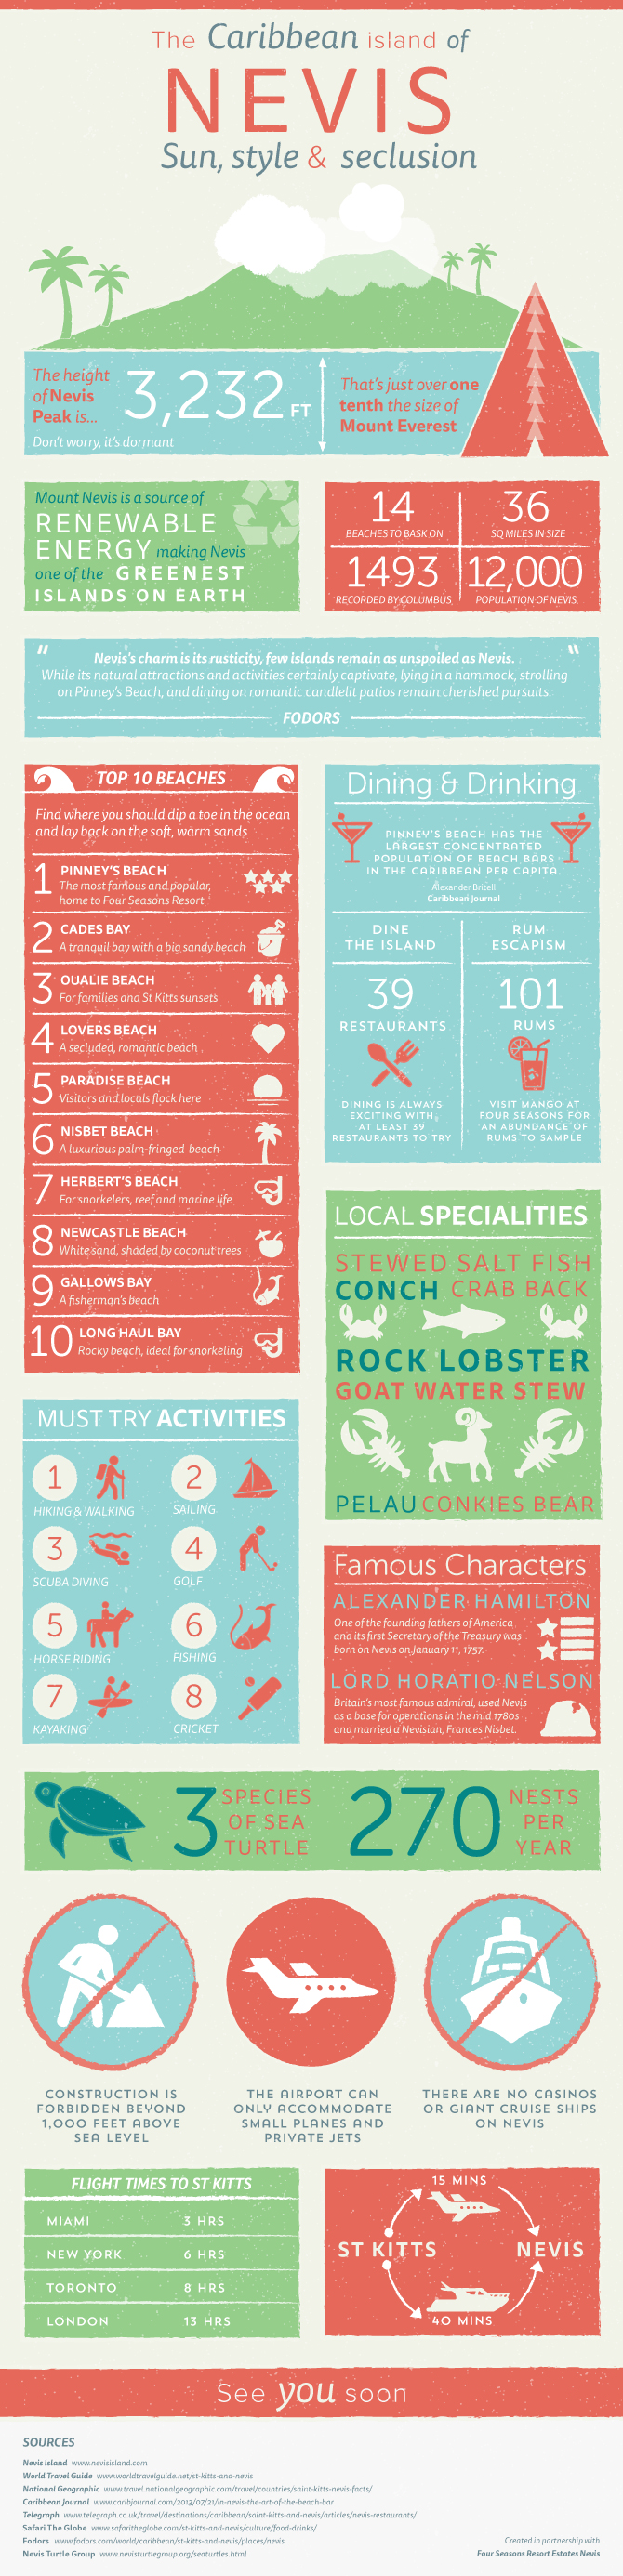 Nevis Infographic | things to do on Nevis, Caribbean